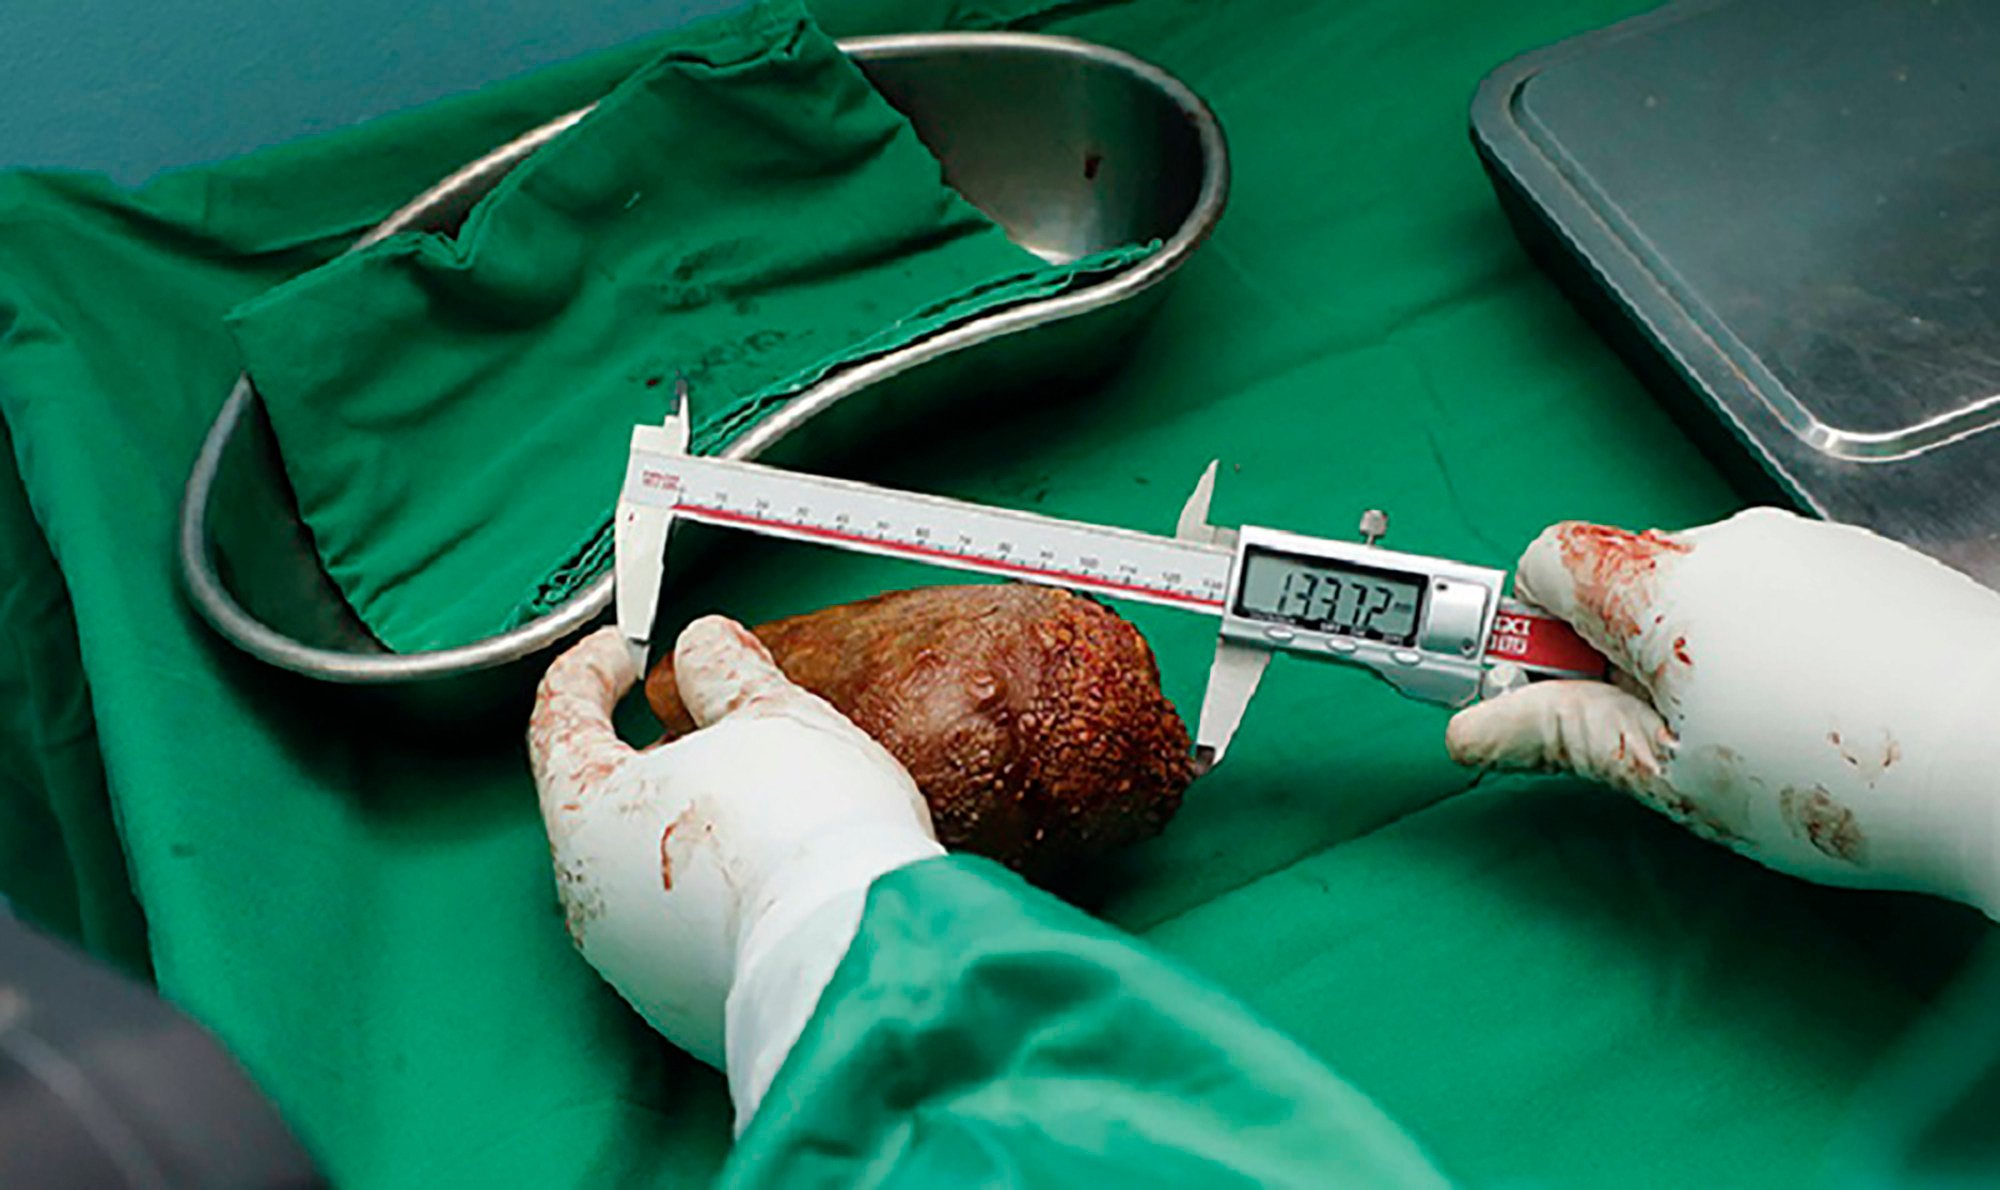 Military doctors in Colombo have removed what has been recorded as the world’s largest kidney stone from a retired soldier. It was 13.37cm long, compared to the average kidney, which is about 10-12cm long. Photo: Sri Lanka Army